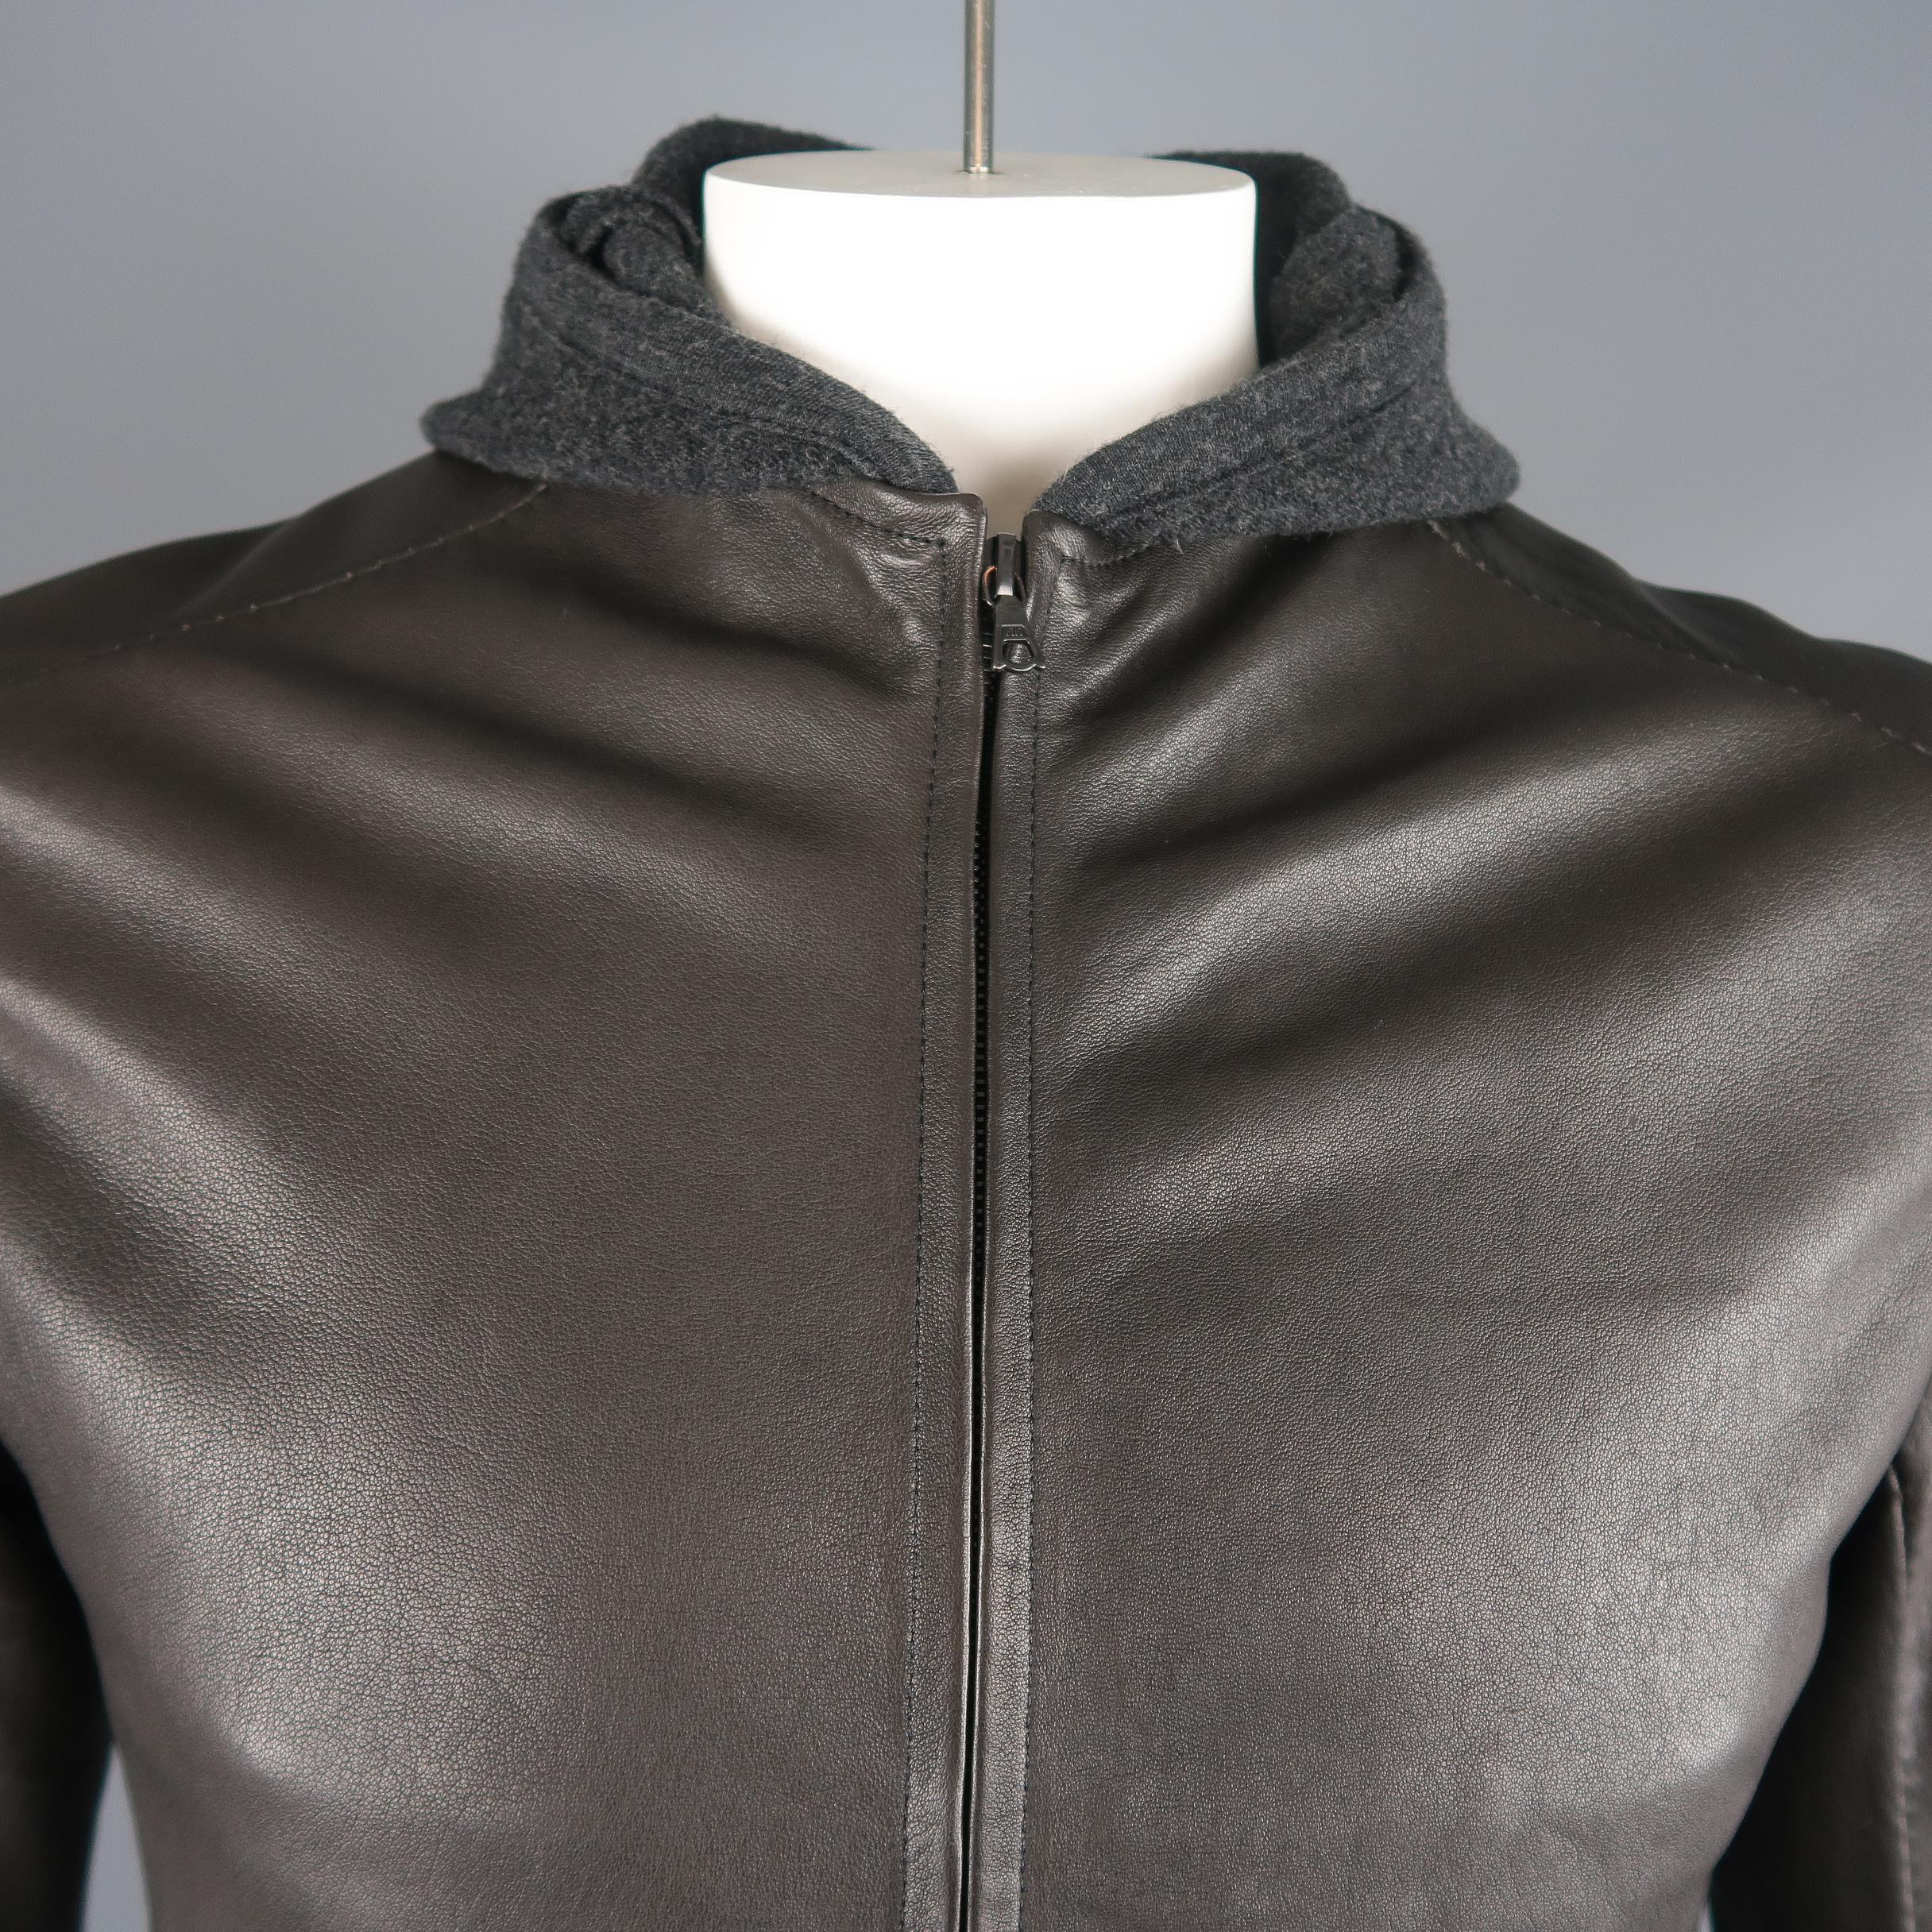 Isaac Sellam jacket comes in dark gray lambskin leather with a zip up front, slit pockets, and extended wool knit liner and hood. Made in France.
 
Excellent Pre-Owned Condition.
Marked: L
 
Measurements:
 
Shoulder: 19 in.
Chest: 44 in.
Sleeve:  27